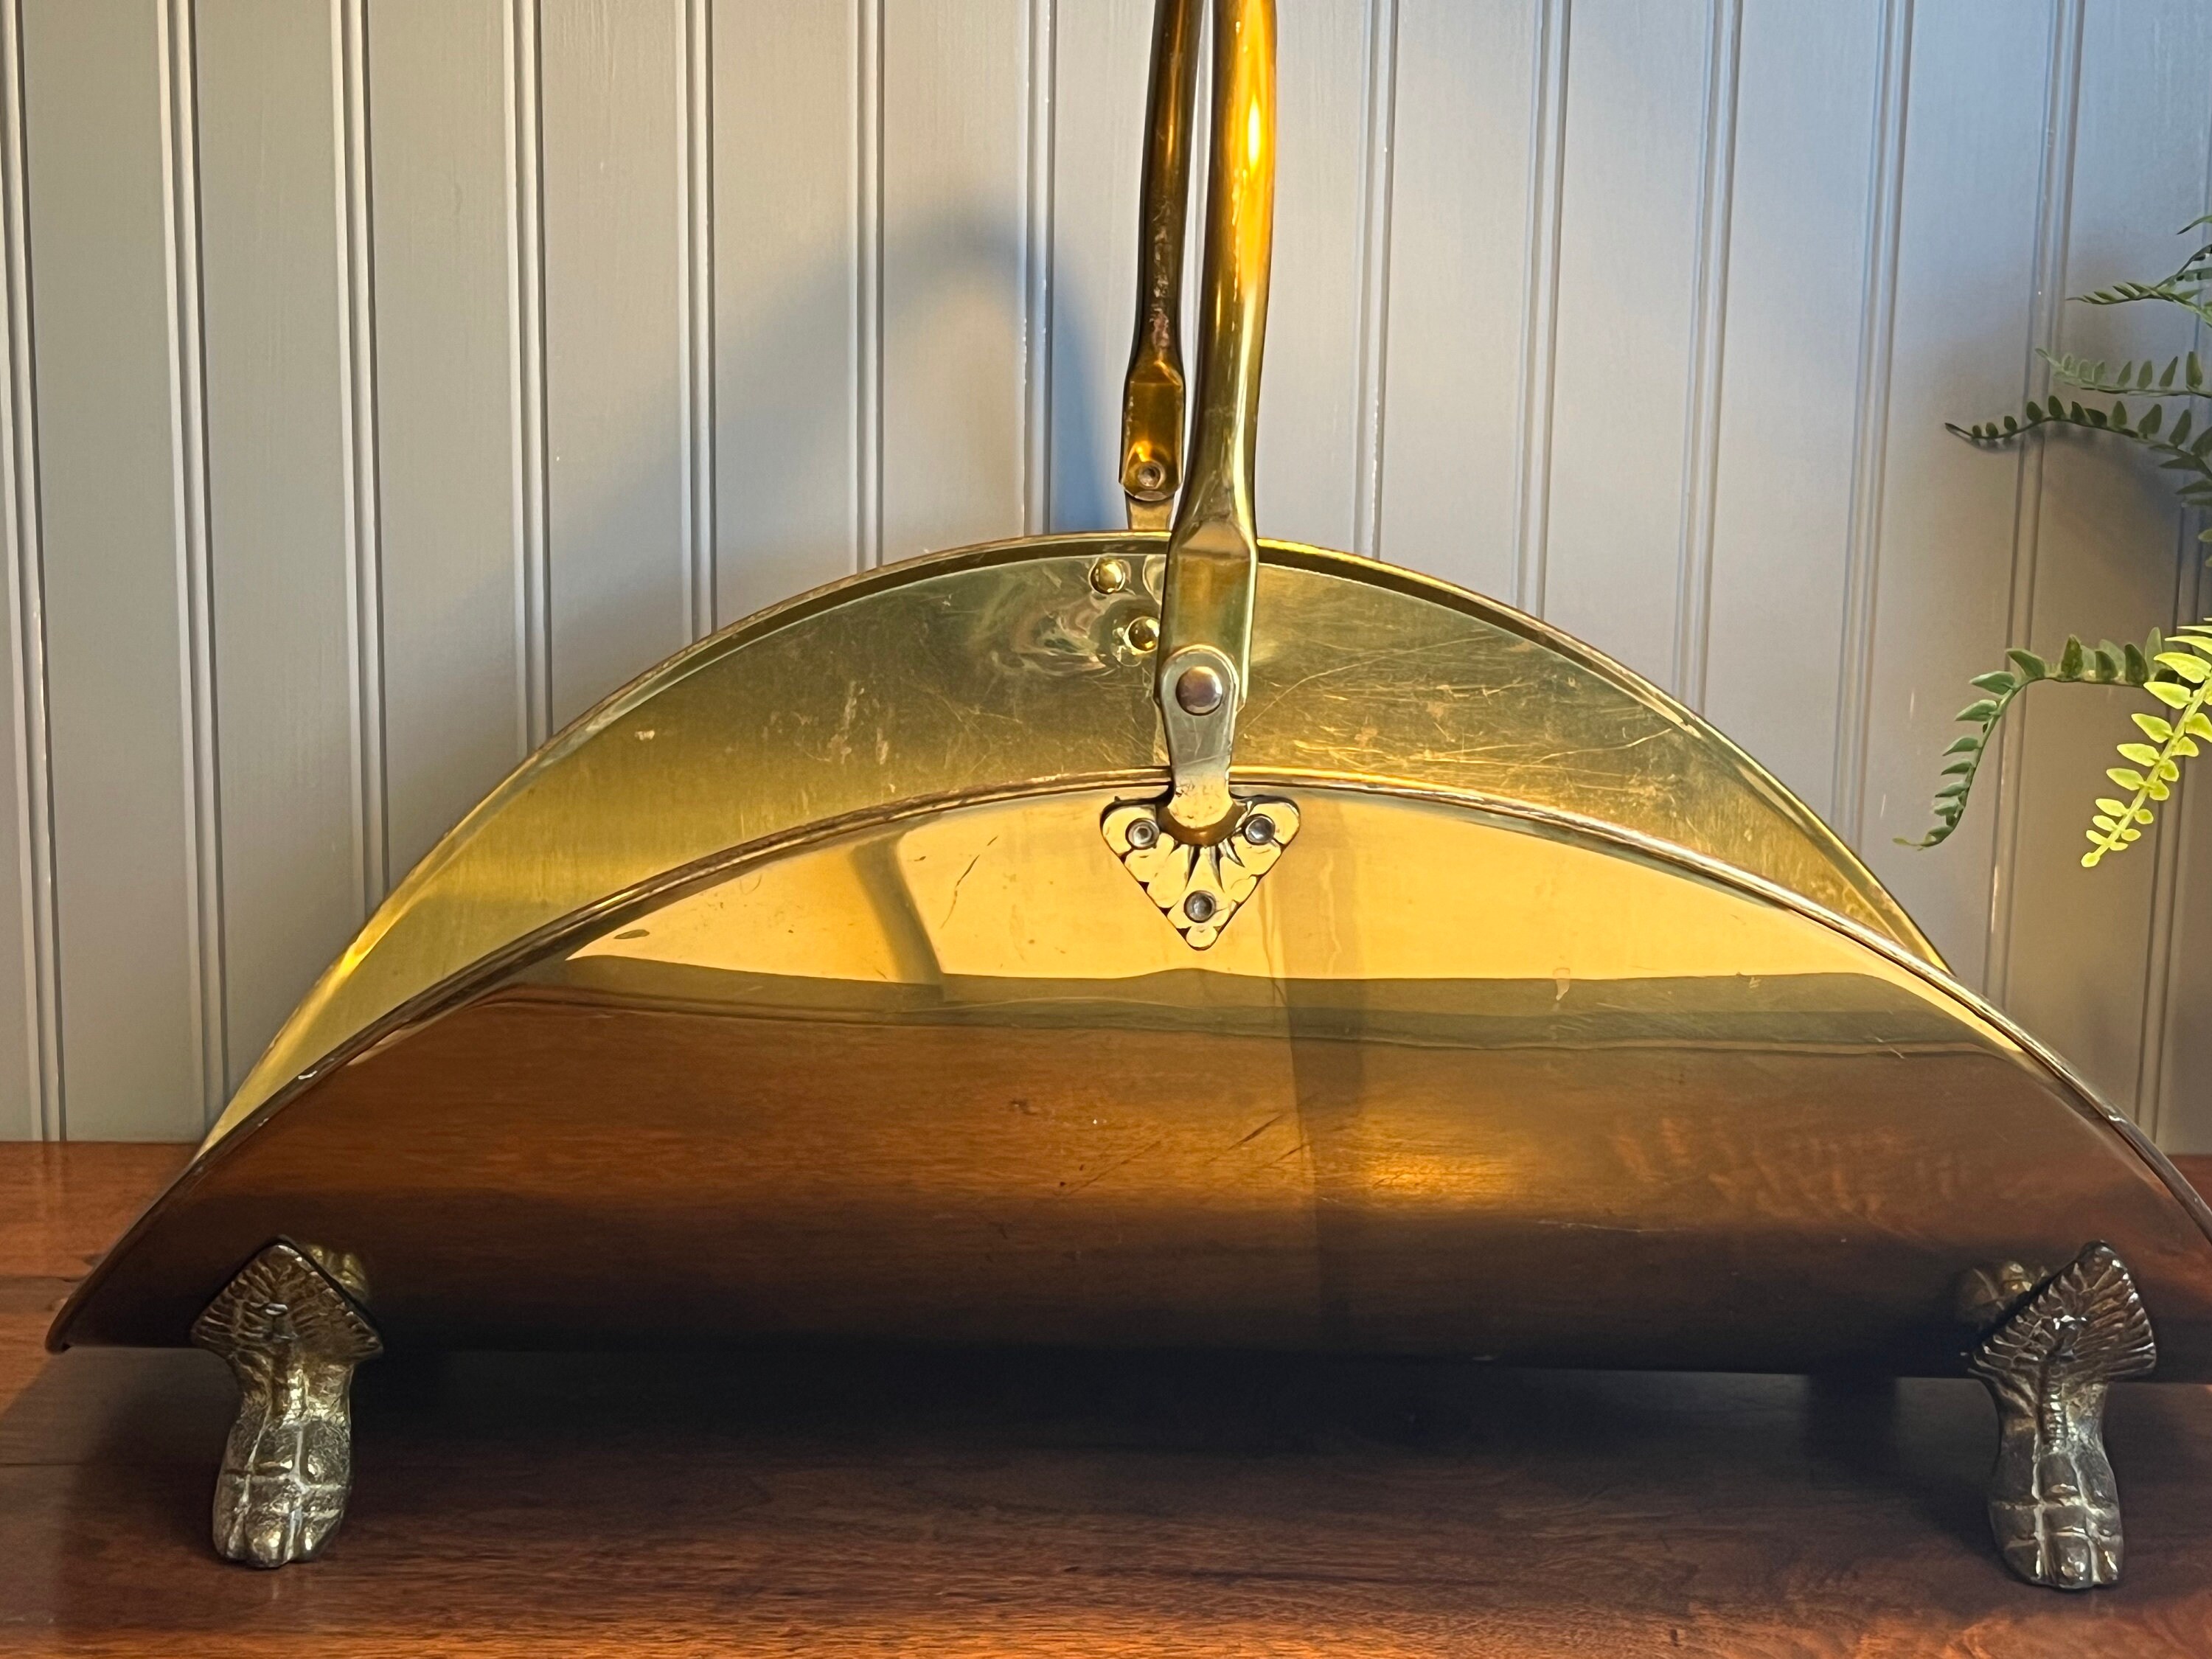 Vintage Brass Fishing Creel and Rod Match Holder, Fireplace, Mantle  Display, Fire Starter, Fishing Decor, Vintage Decor, Home Decor, Cottage -   Canada